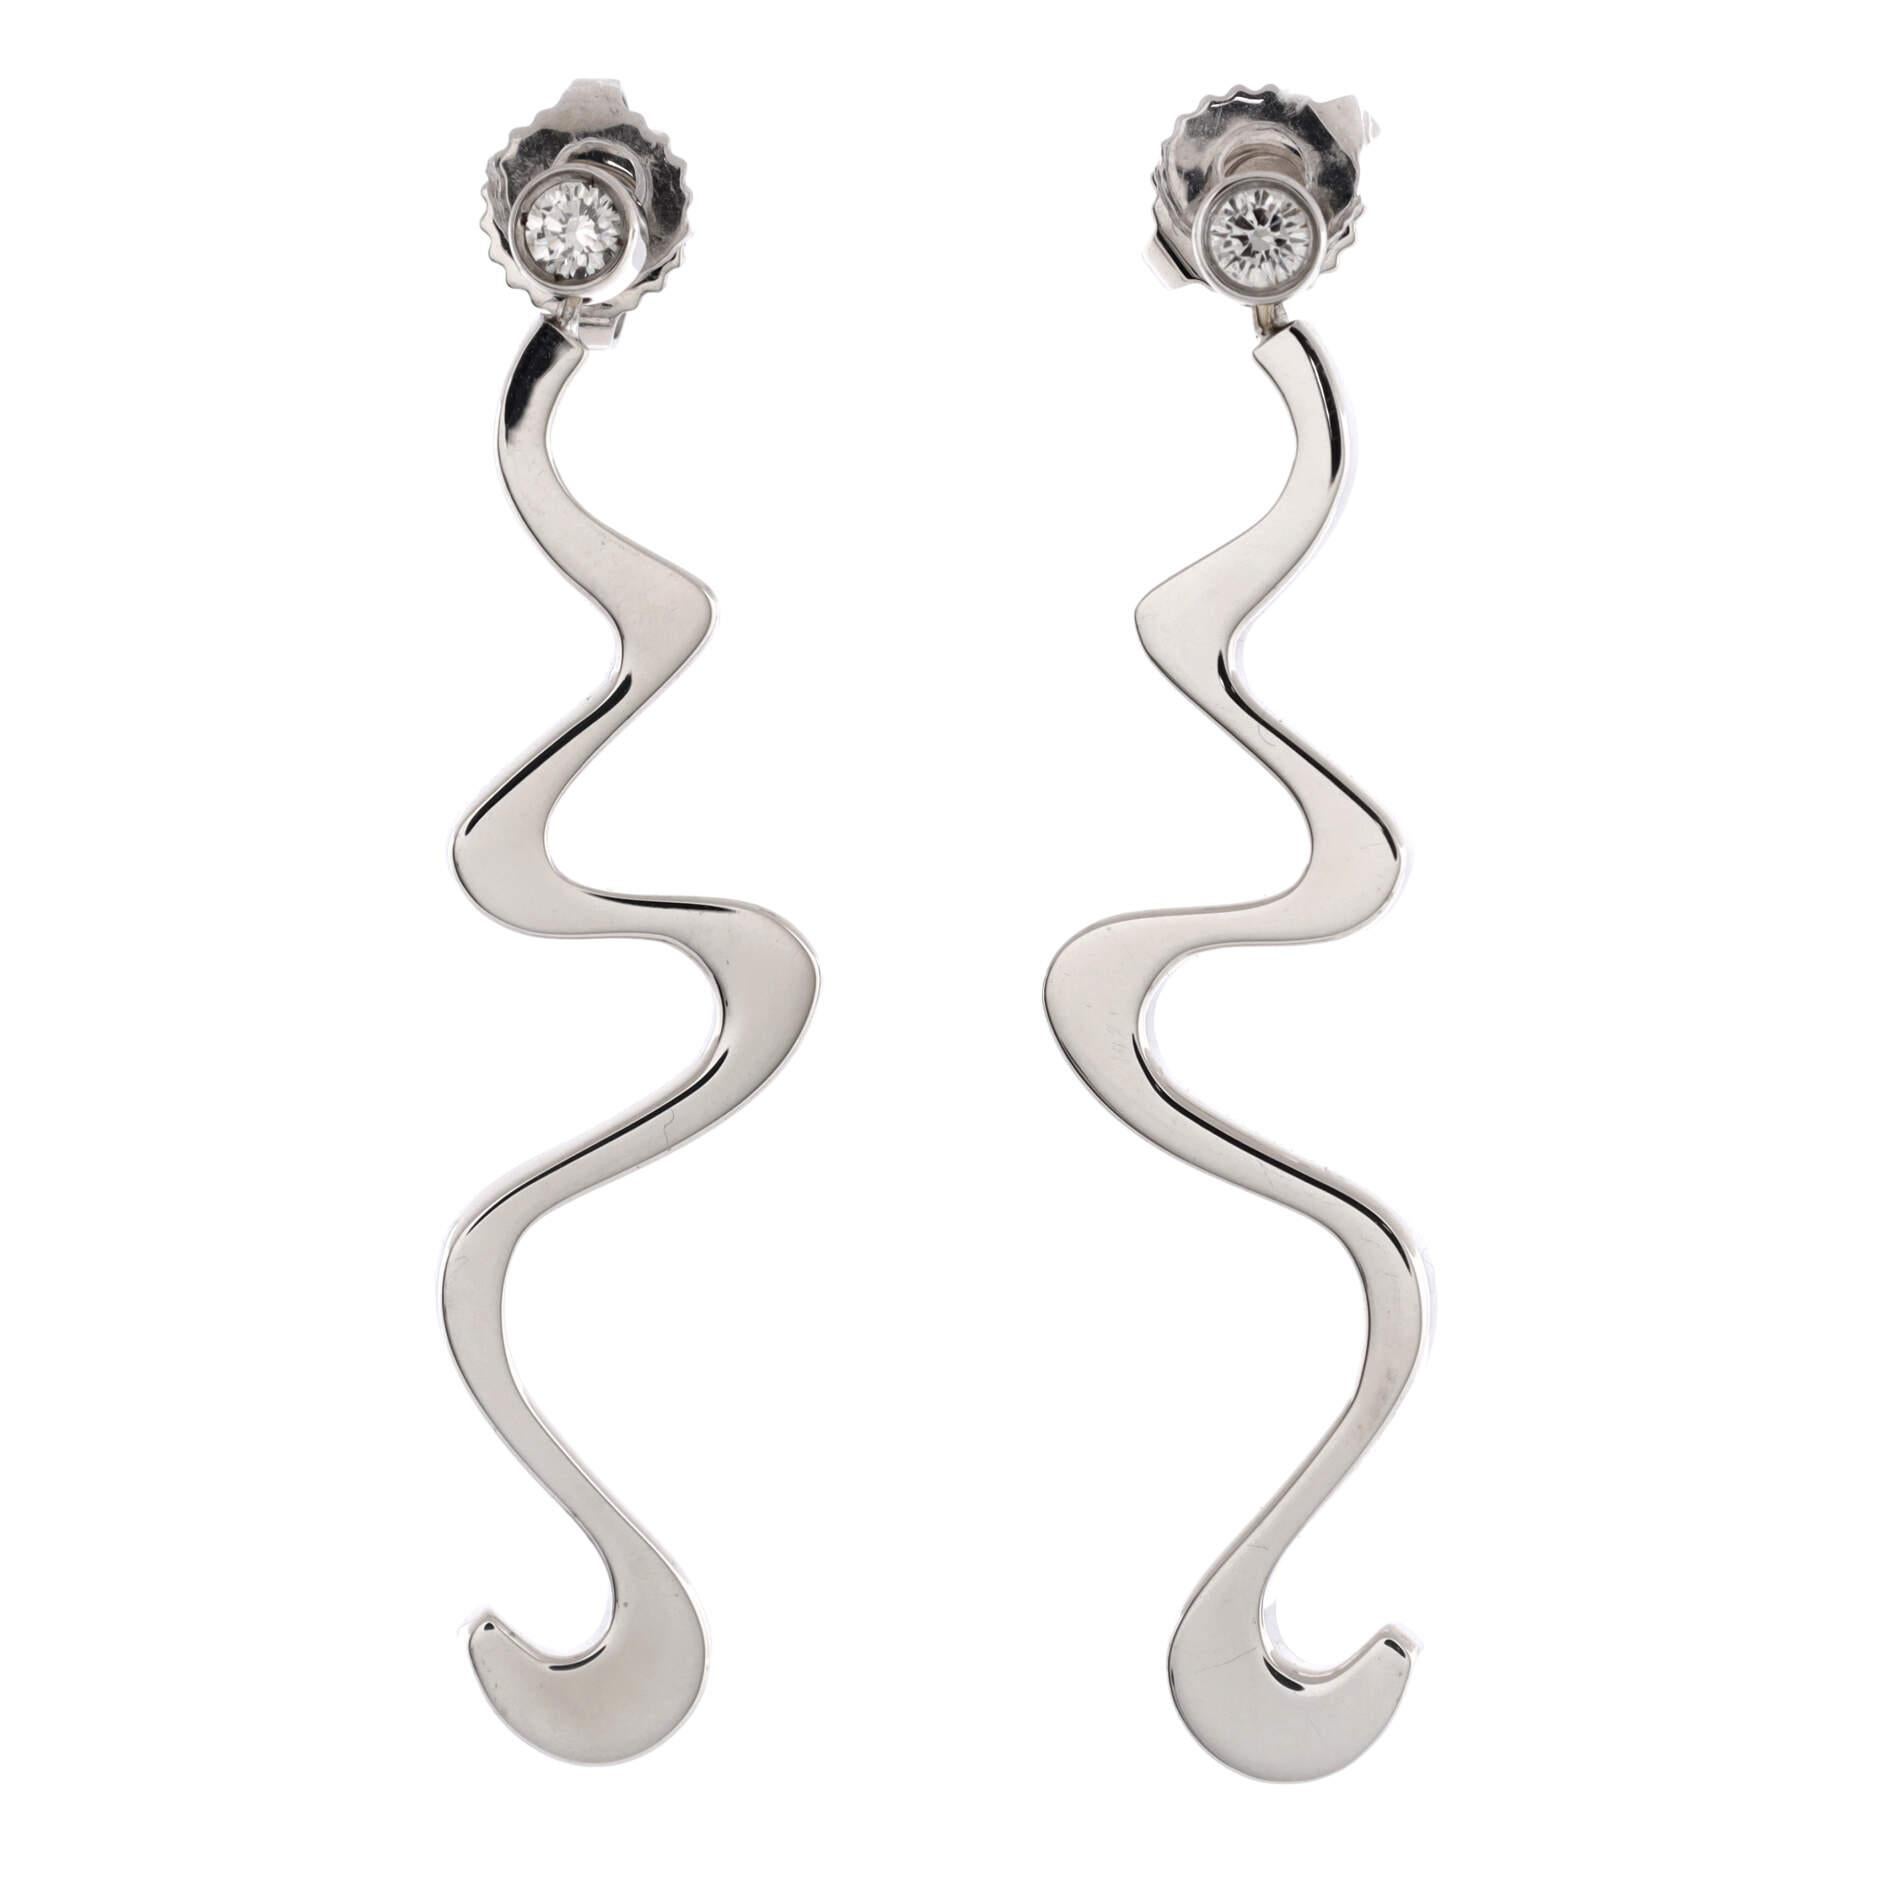 Condition: Great. Minor wear throughout.
Accessories: No Accessories
Measurements: Height/Length: 41.80 mm, Width: 10.00 mm
Designer: Tiffany & Co.
Model: Frank Gehry Equus Dangling Earrings 18K White Gold with Diamonds
Exterior Color: White